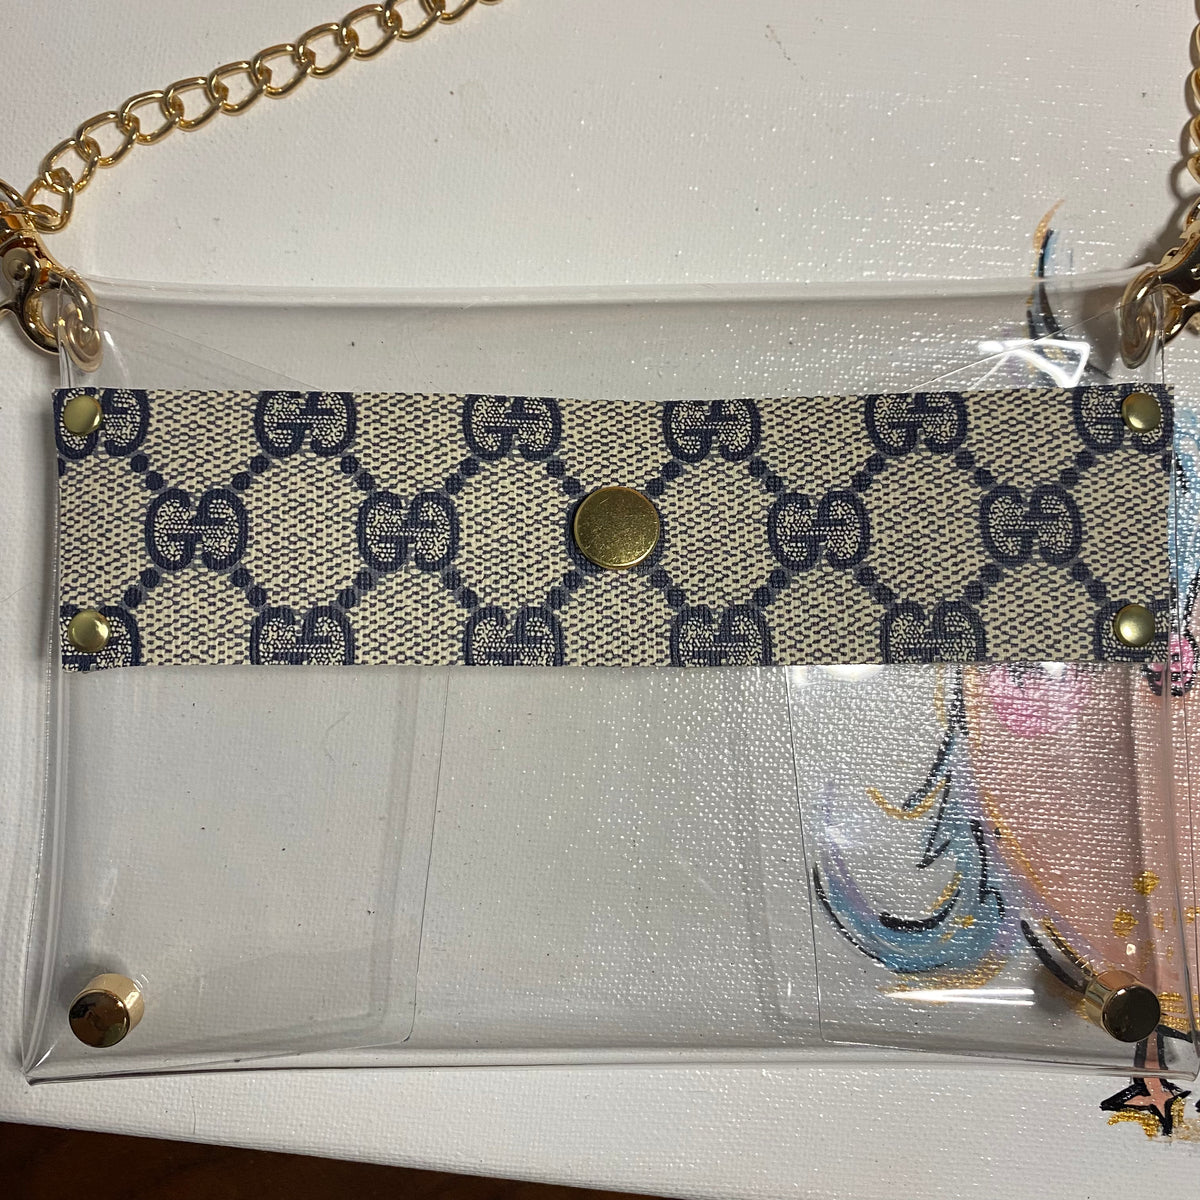 upcycled louis vuitton clear bag